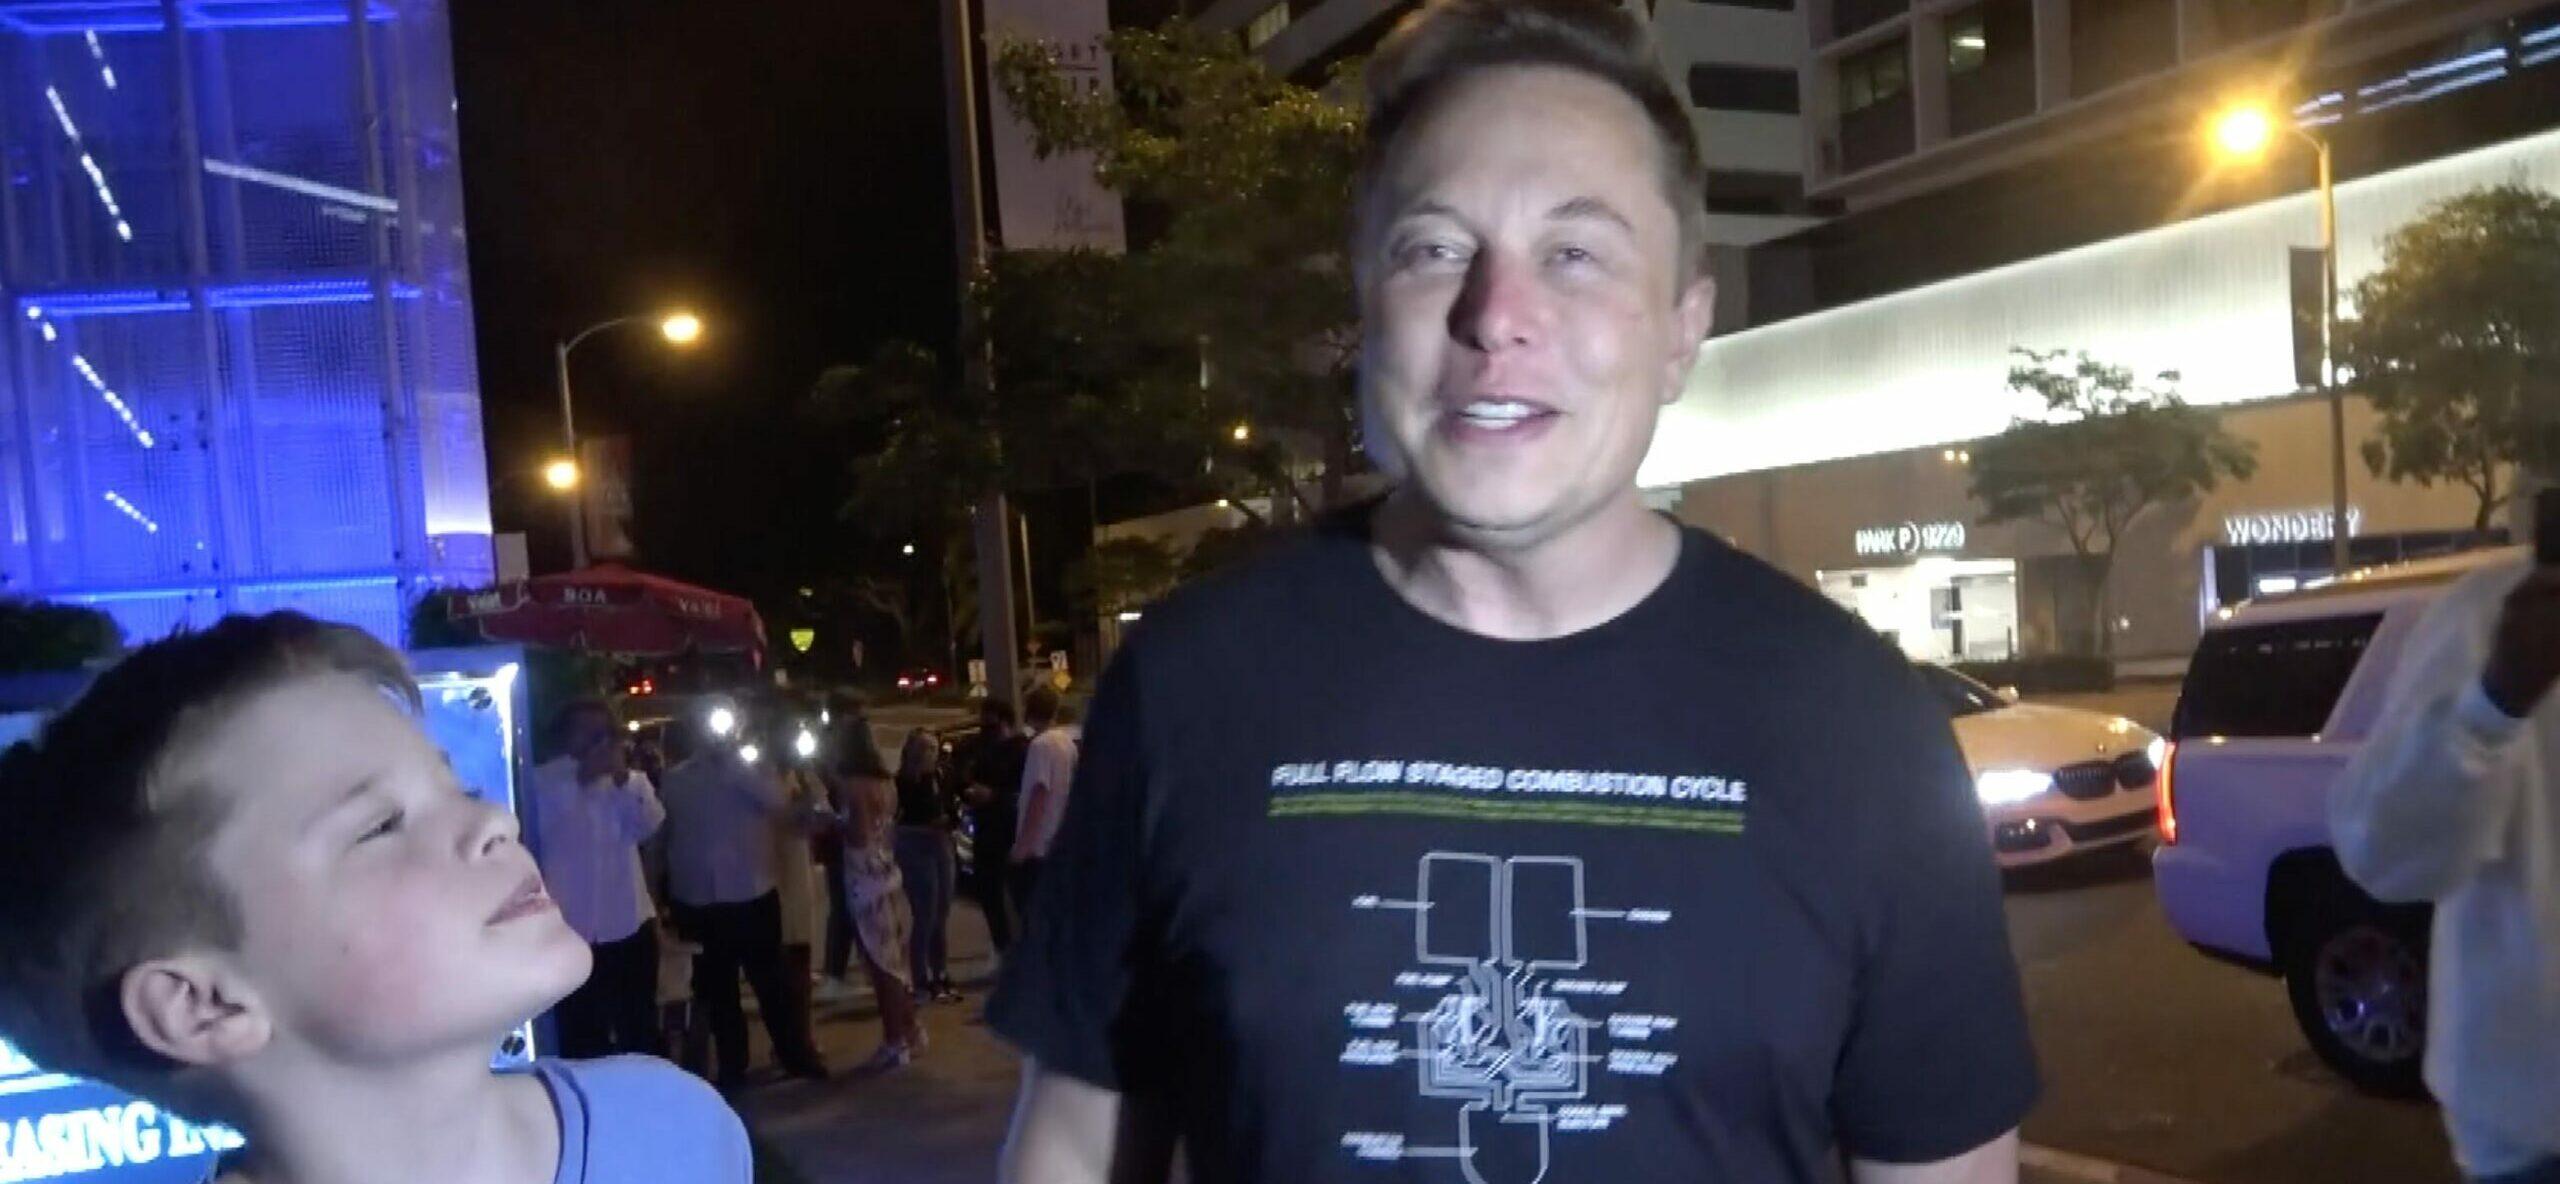 Elon Musk makes a rare appearance with his son as they both arrived to dinner